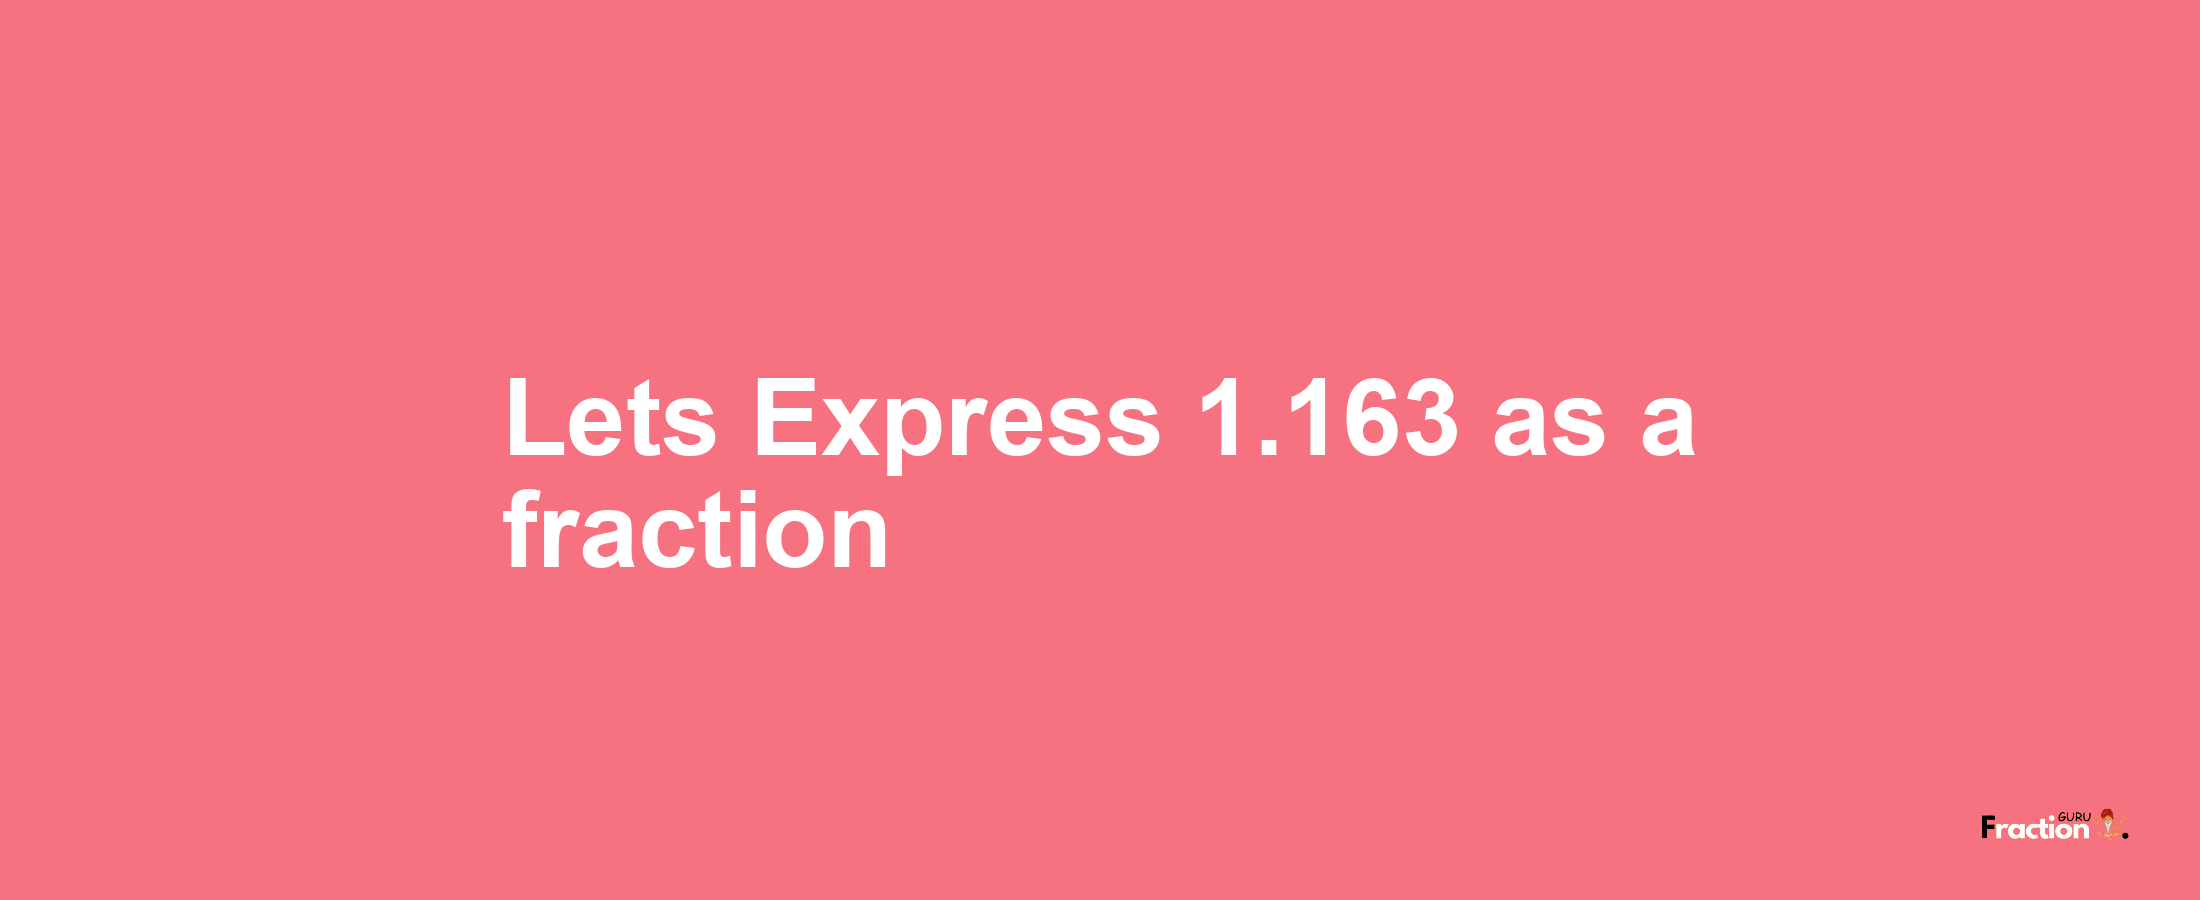 Lets Express 1.163 as afraction